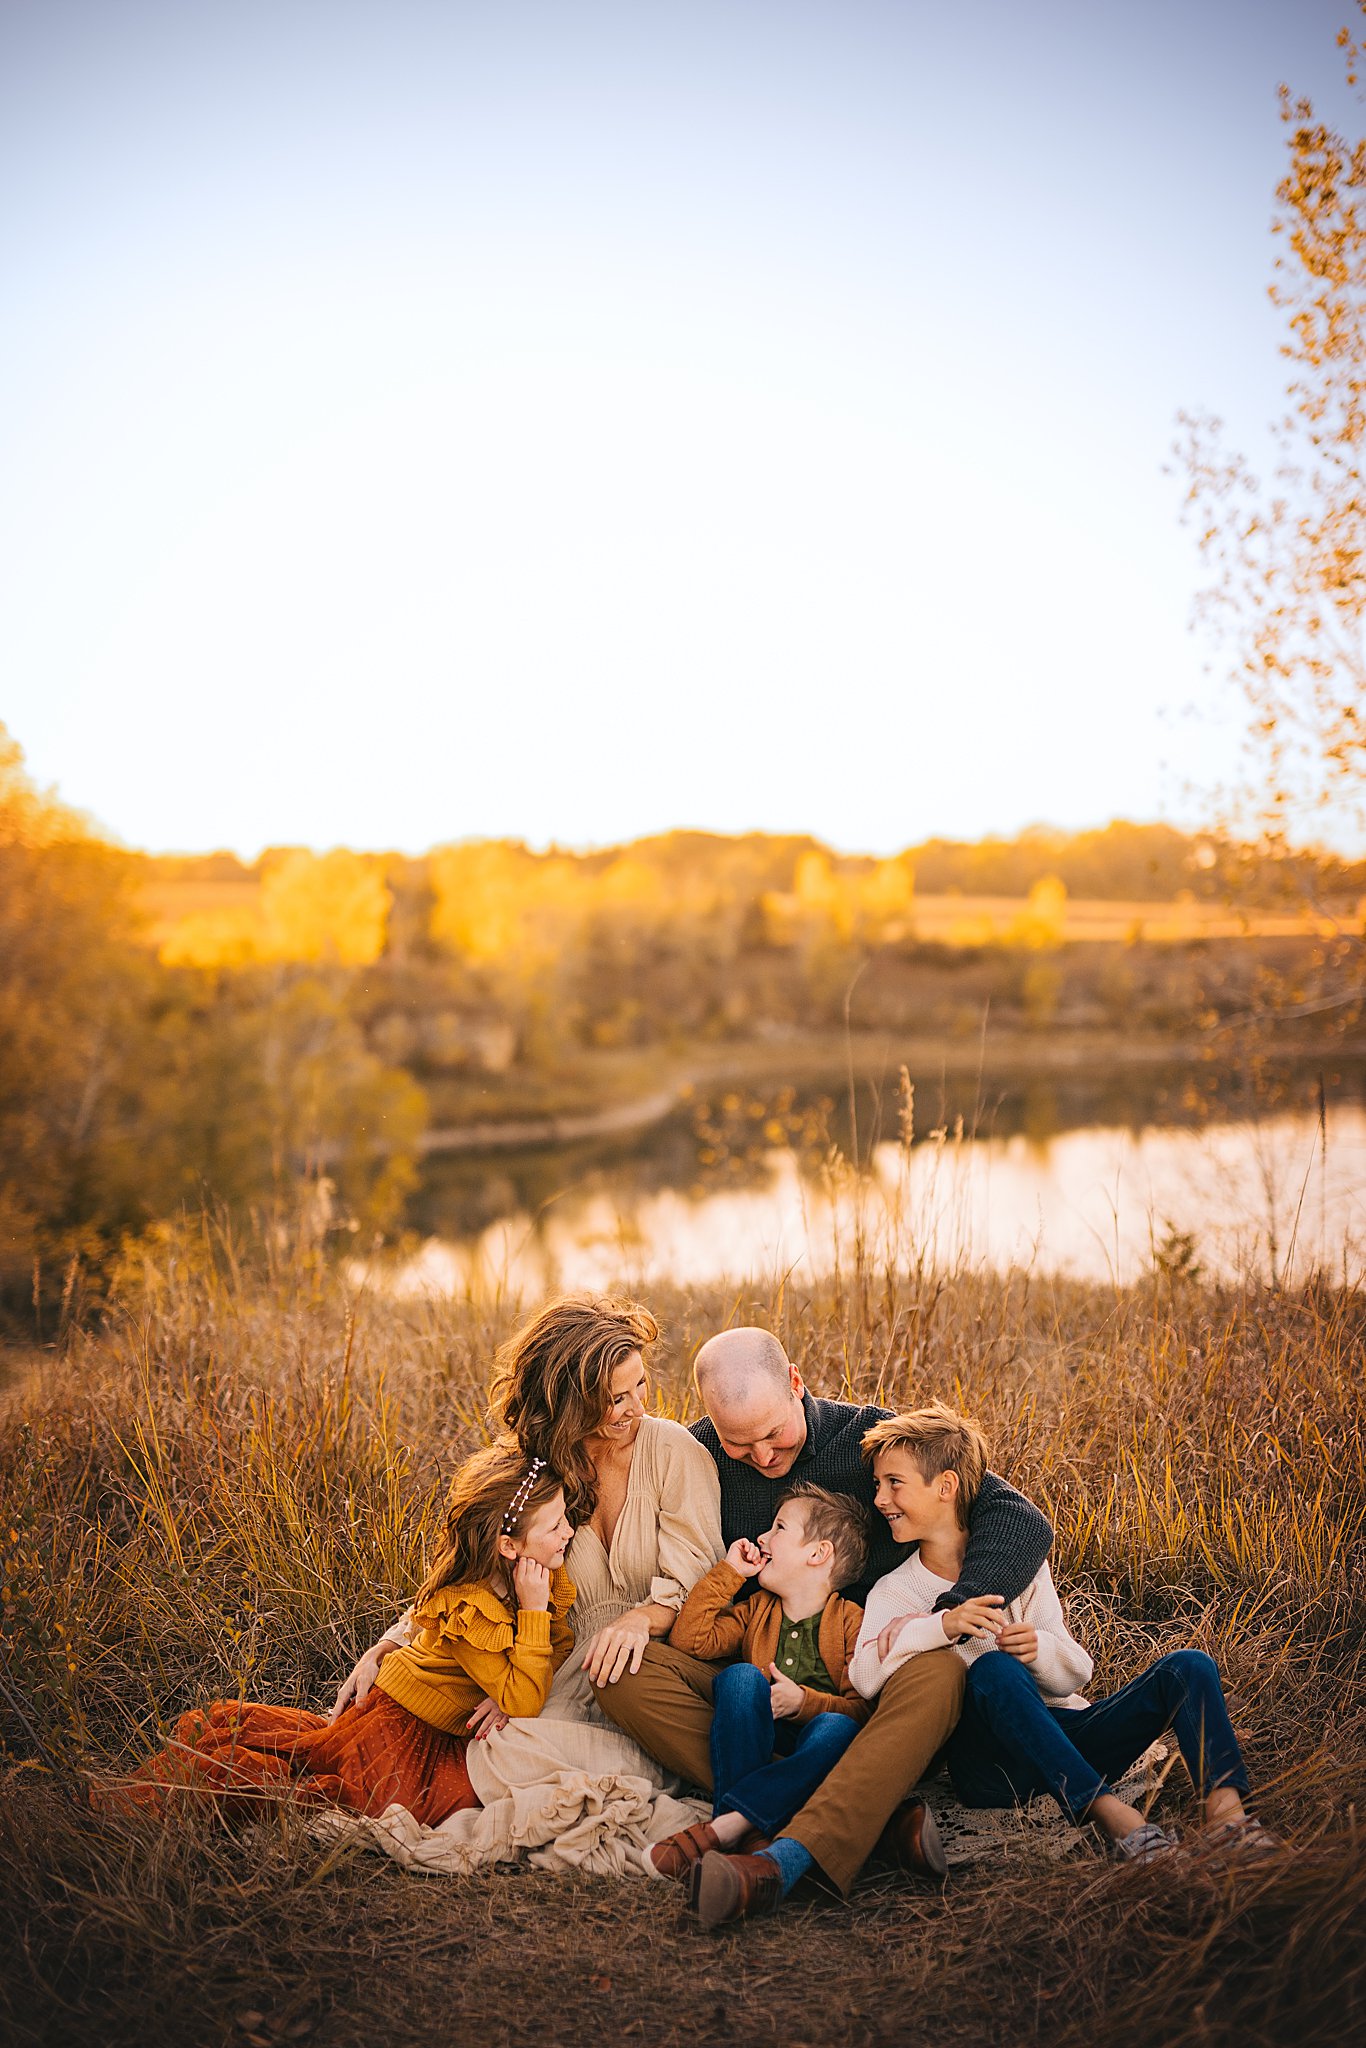 A family shares a candid moment together at sunset on the edge of a quarry